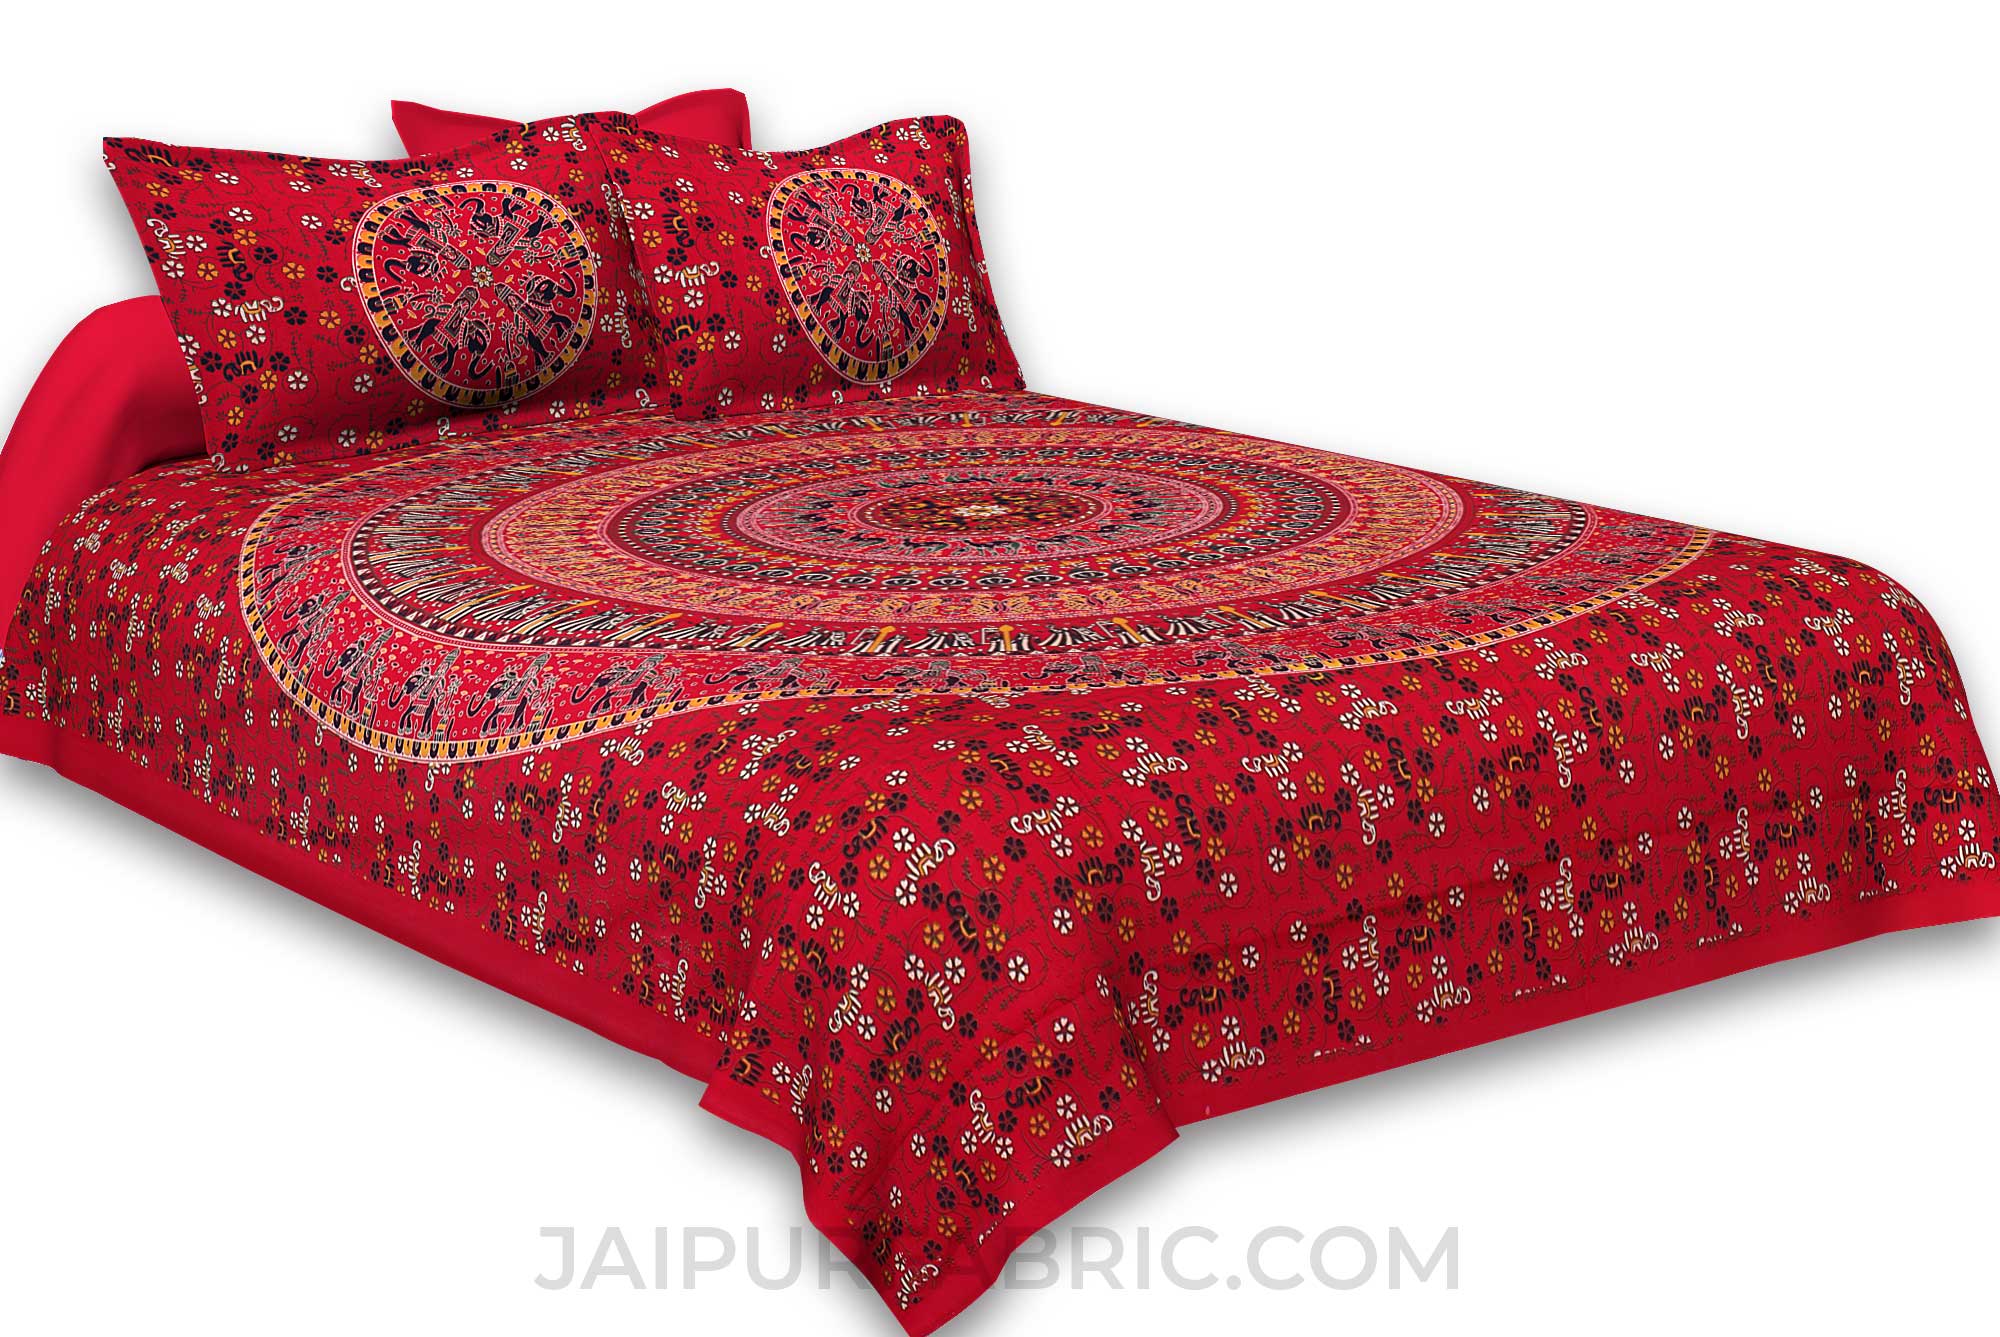 Pure Cotton Red Mandala Traditional Animal Print King Size Double Bedsheet with 2 Pillow Cover